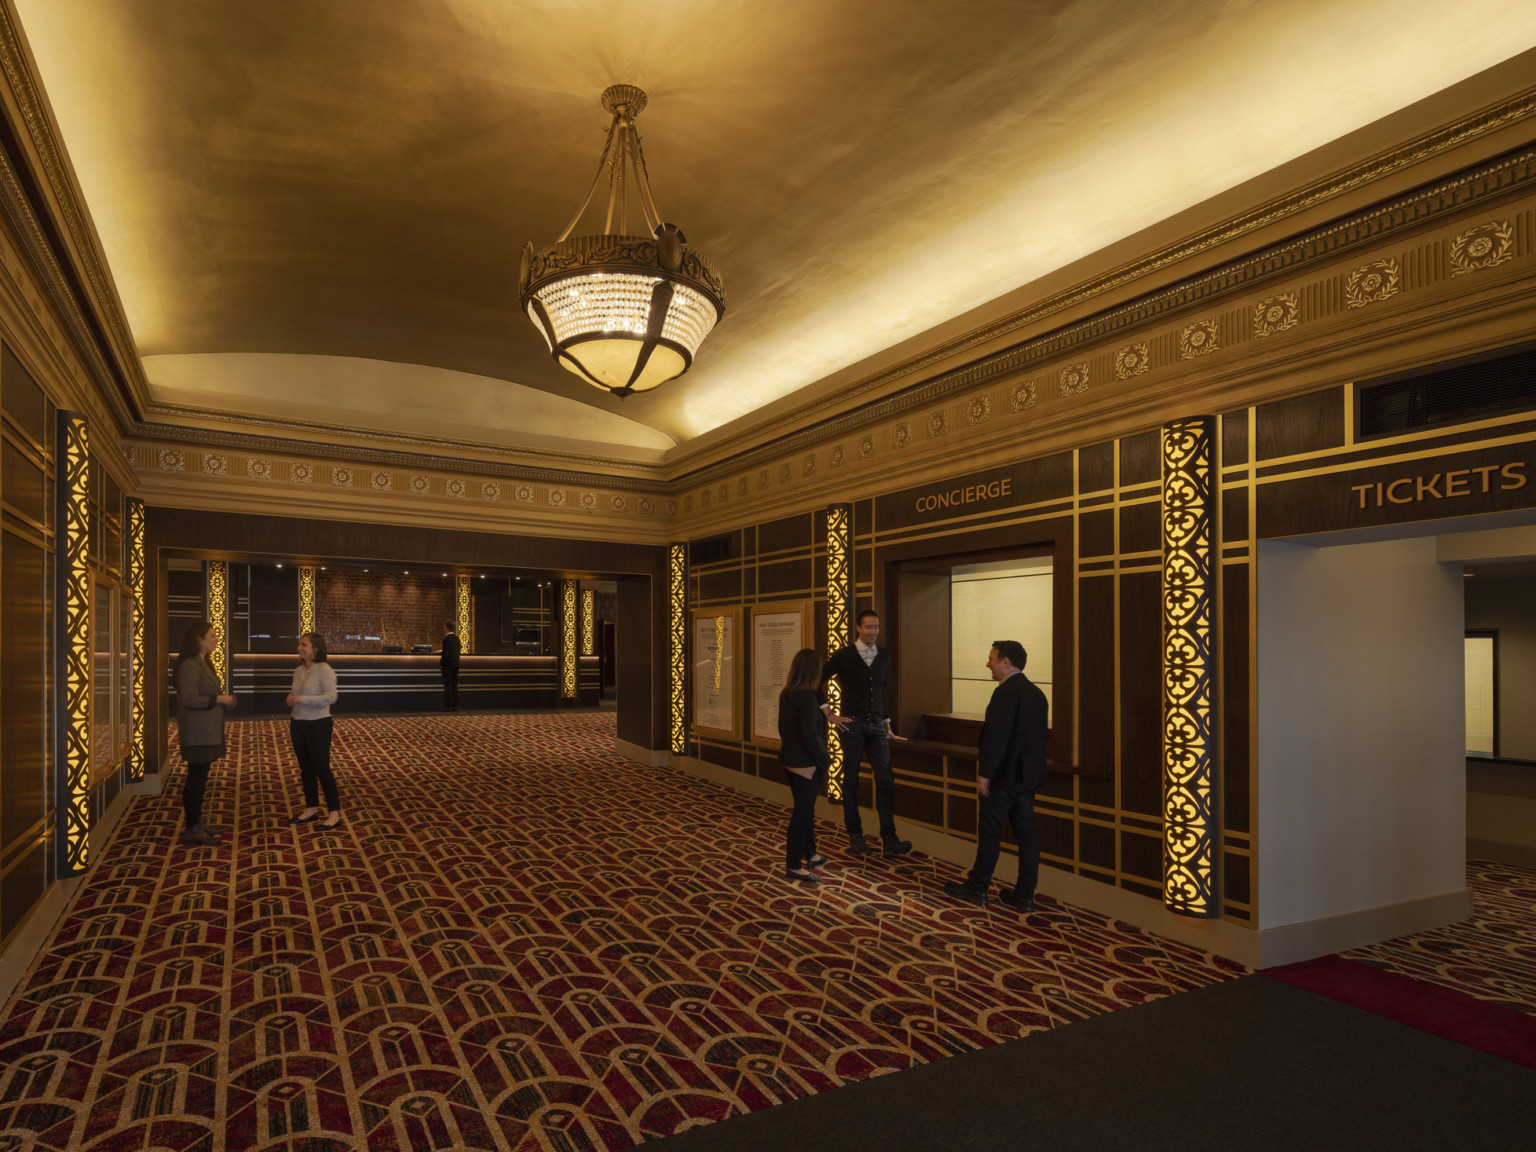 Art deco lobby with concierge and ticket booths. Carved wood wall mouldings, domed rectangular ceiling with chandelier